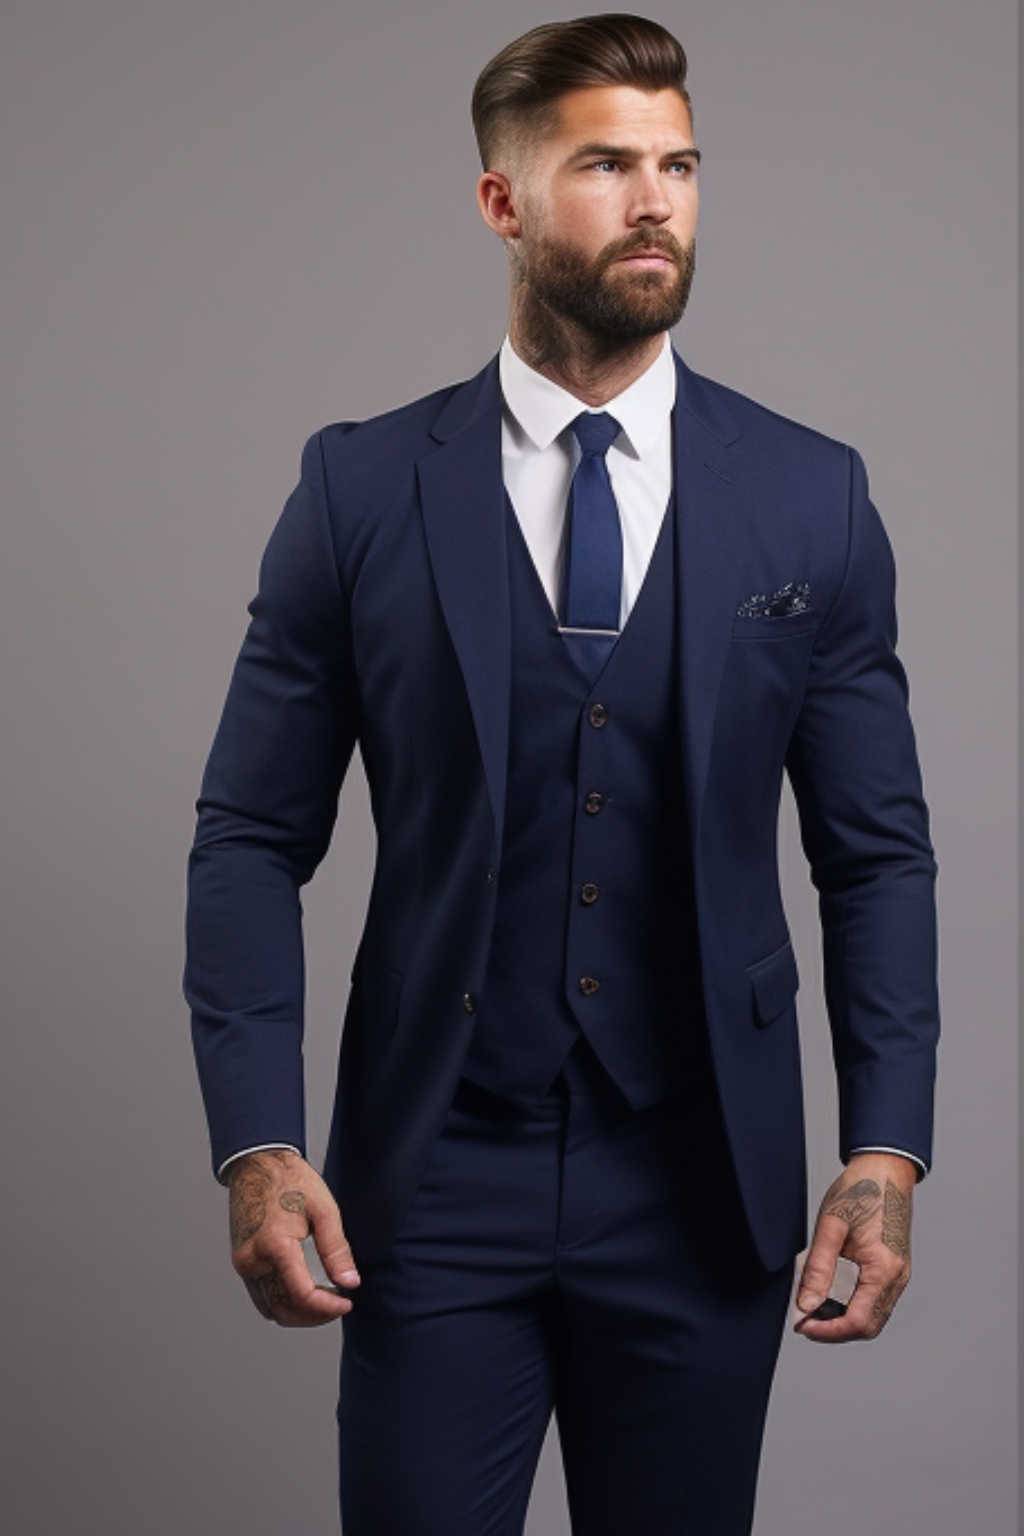 Royal Blue Plaid Mens Tweed Wedding Suit For Men Set With Thick Slim Fit  Coat And Pant Designs For Autumn And Winter From Goodlookings, $76.33 |  DHgate.Com